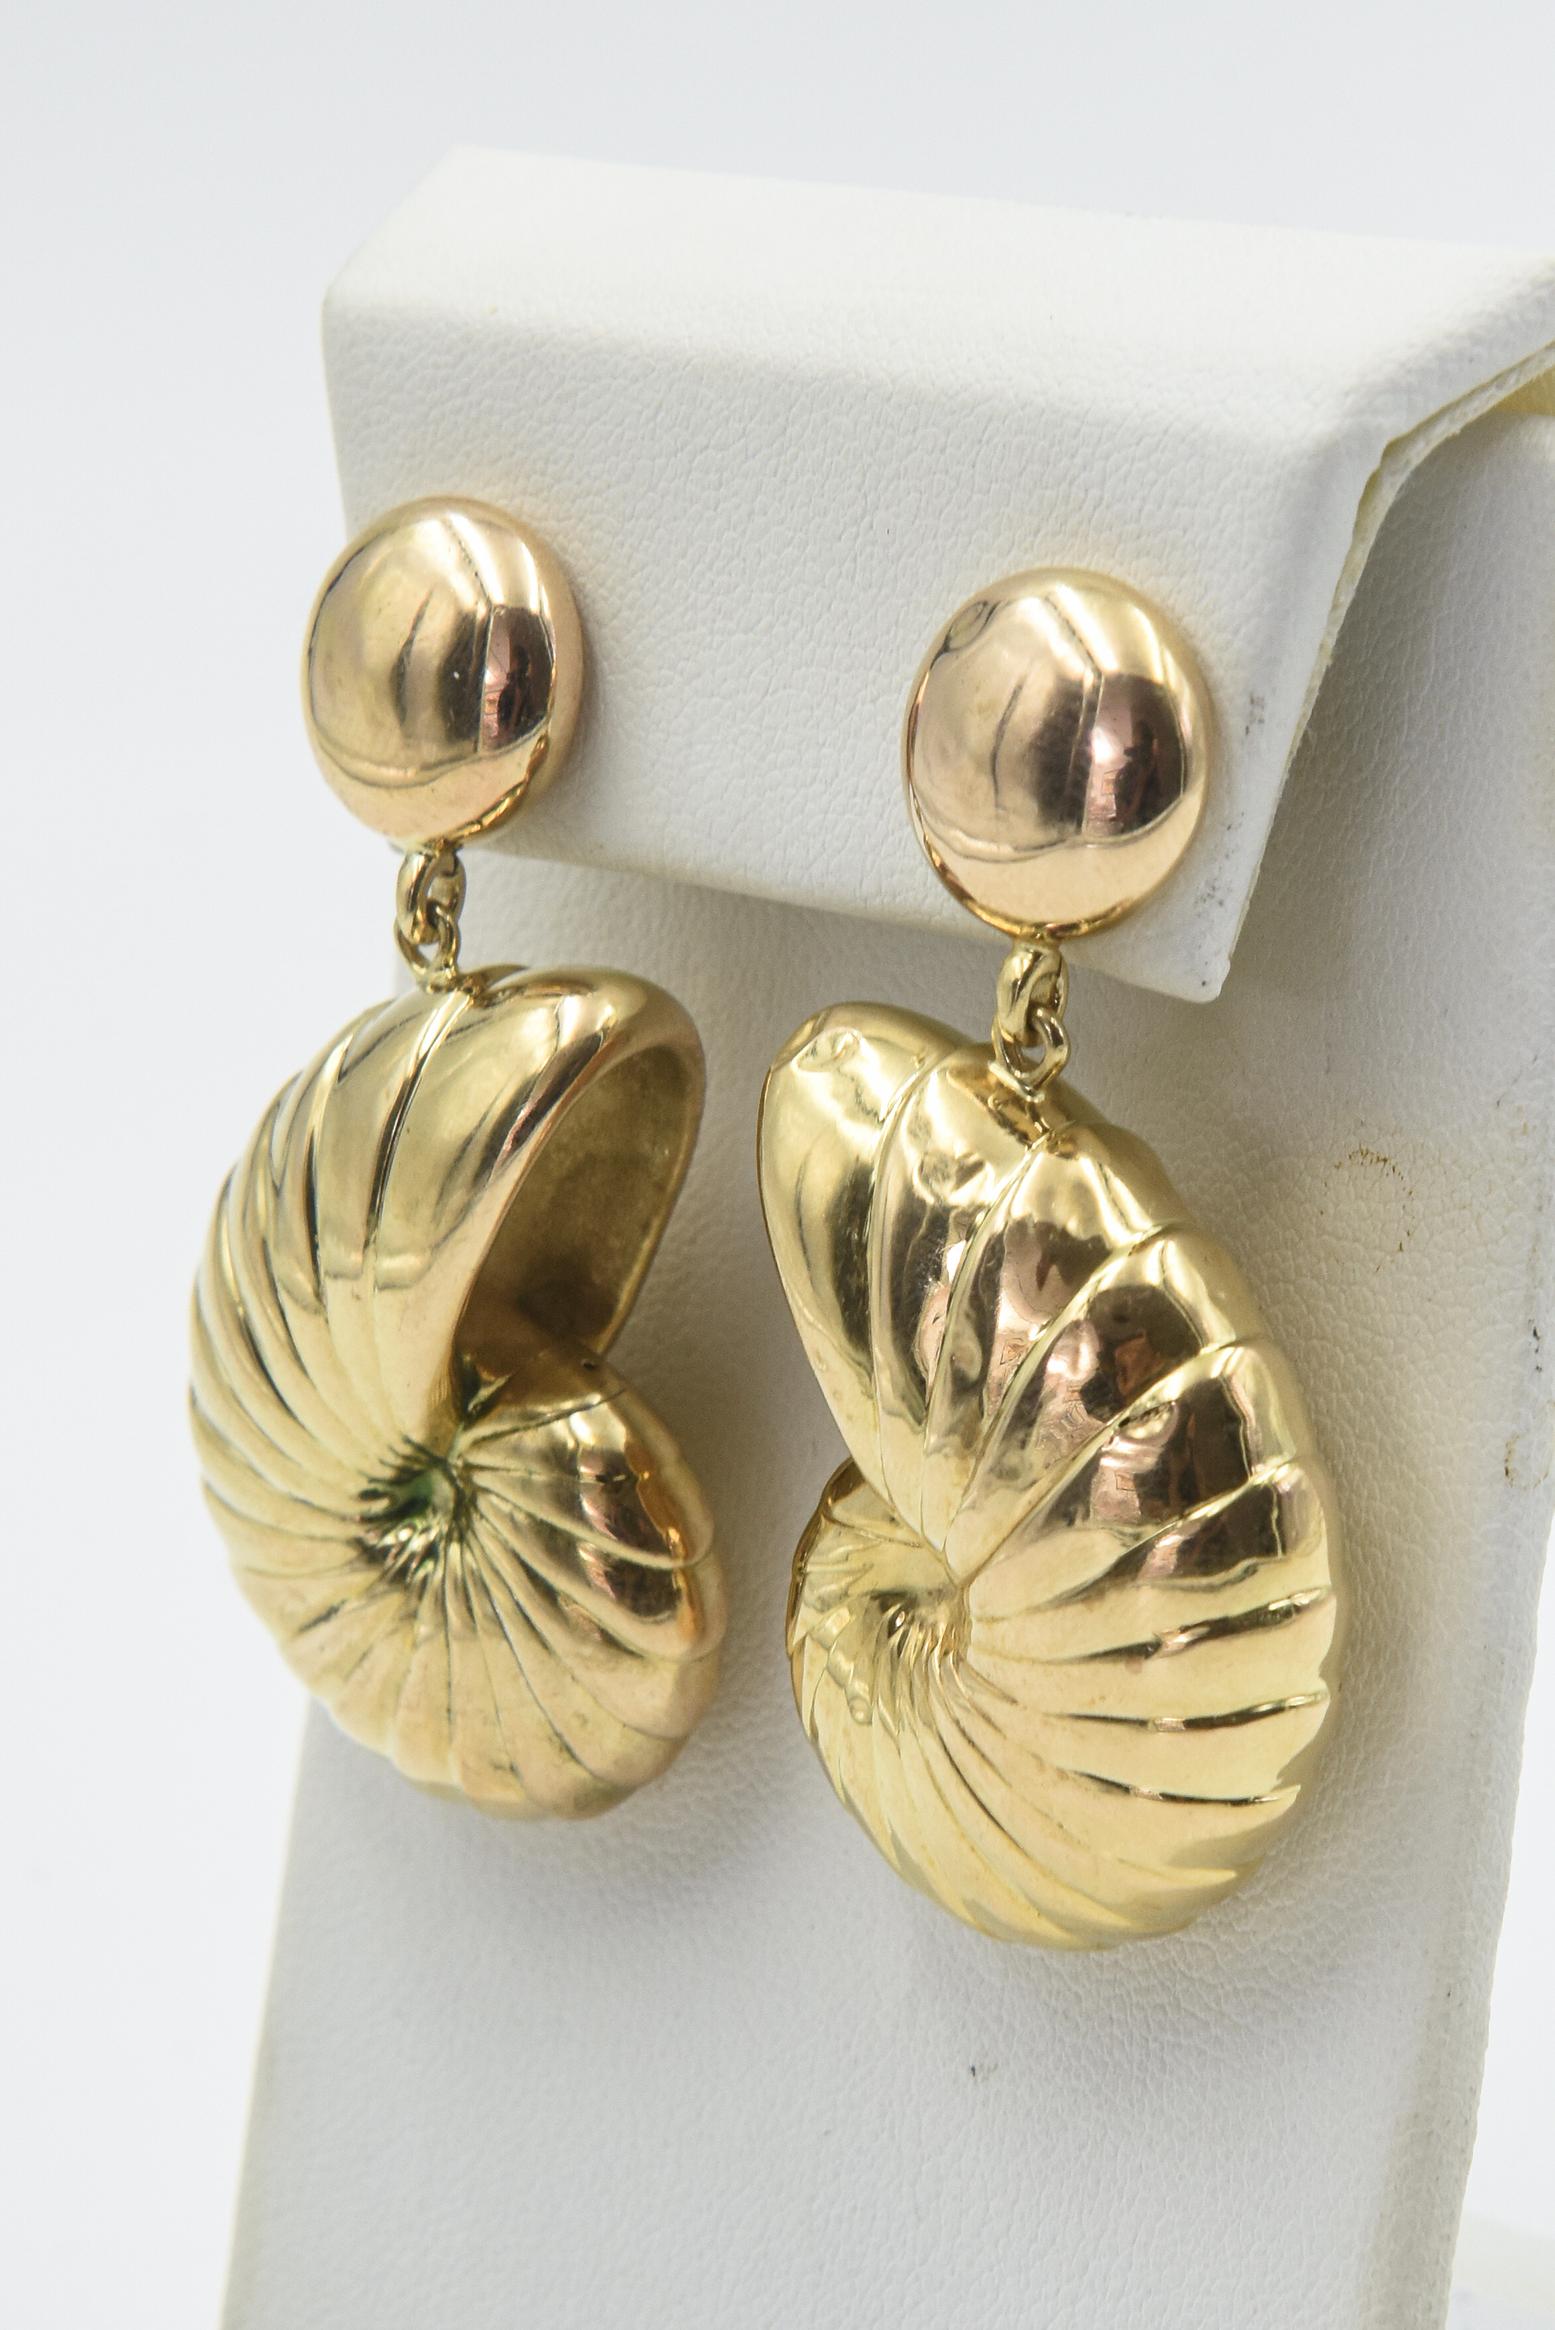 Impressive 14k yellow gold natilus shell earrings dangling from a rose gold 14 button earring.  These earrings are large, but hollow so light weight and easy to wear.  They are   2